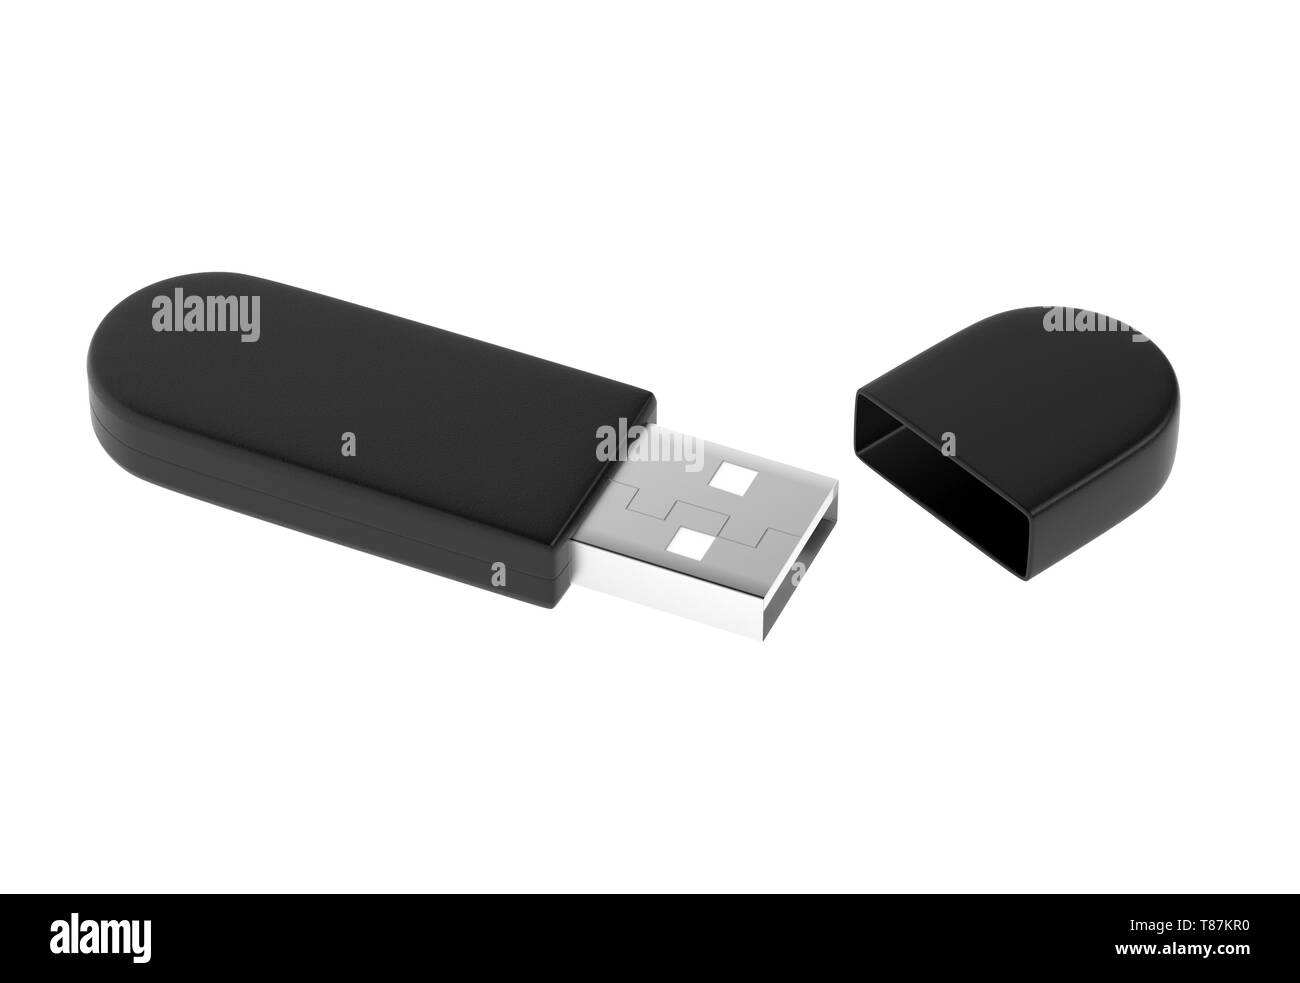 USB flash drive. 3d rendering illustration isolated on white background Stock Photo